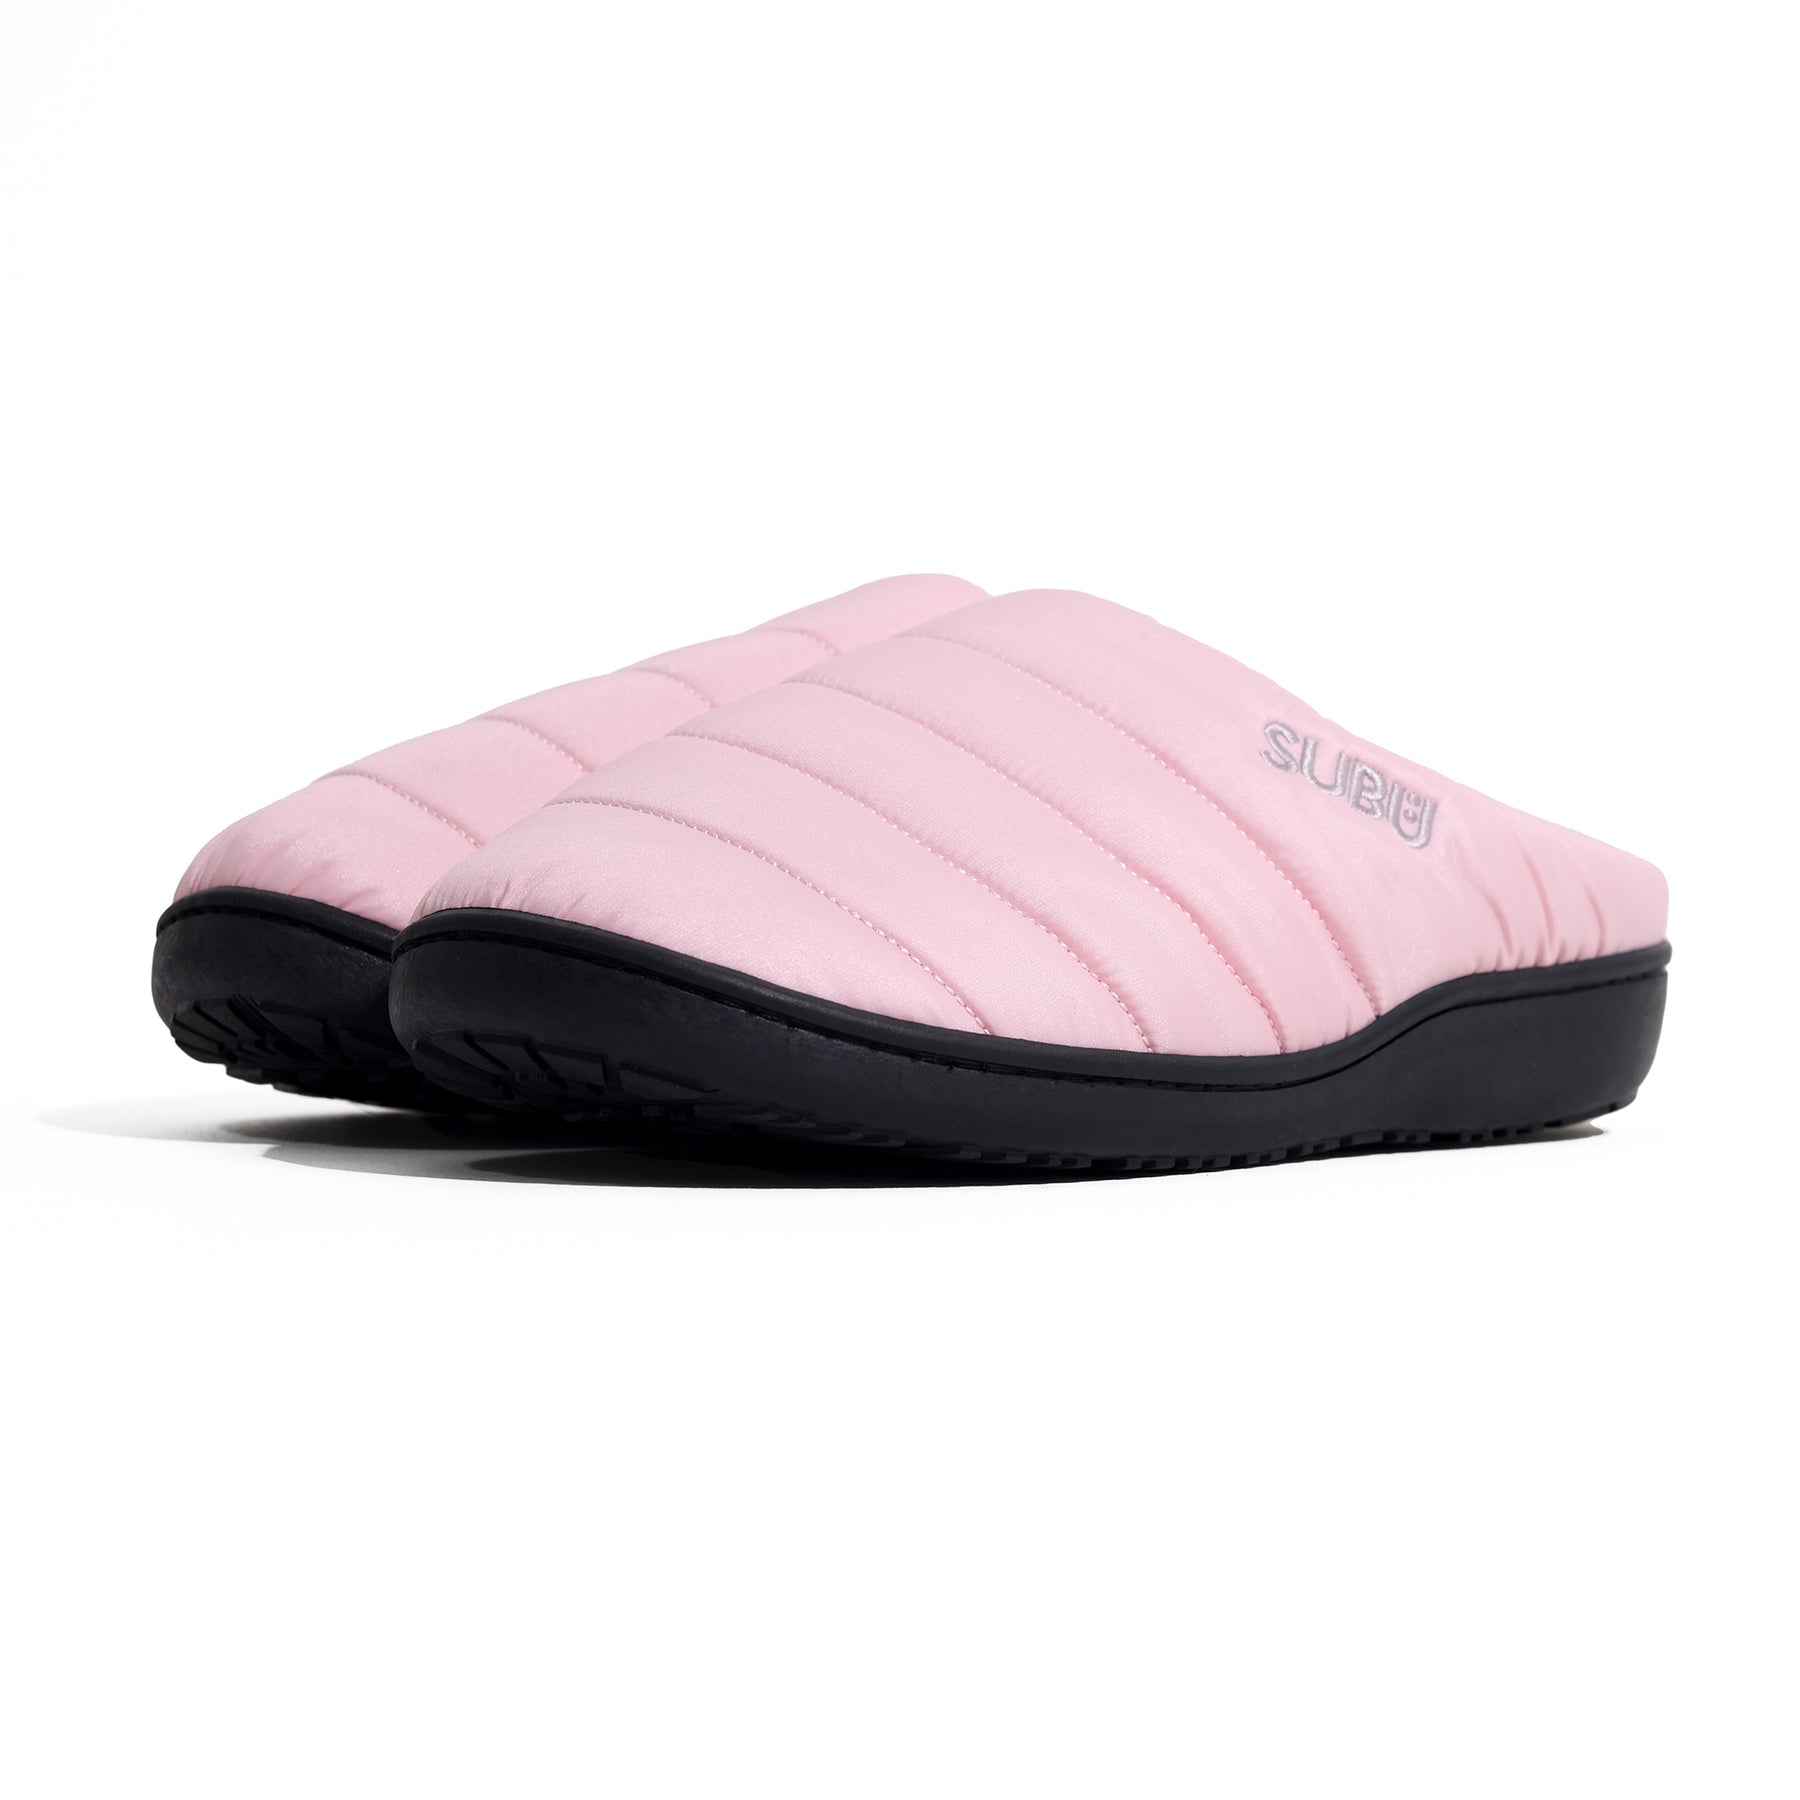 SUBU, Fall & Winter Slippers Pink, Size, 1, Slippers,